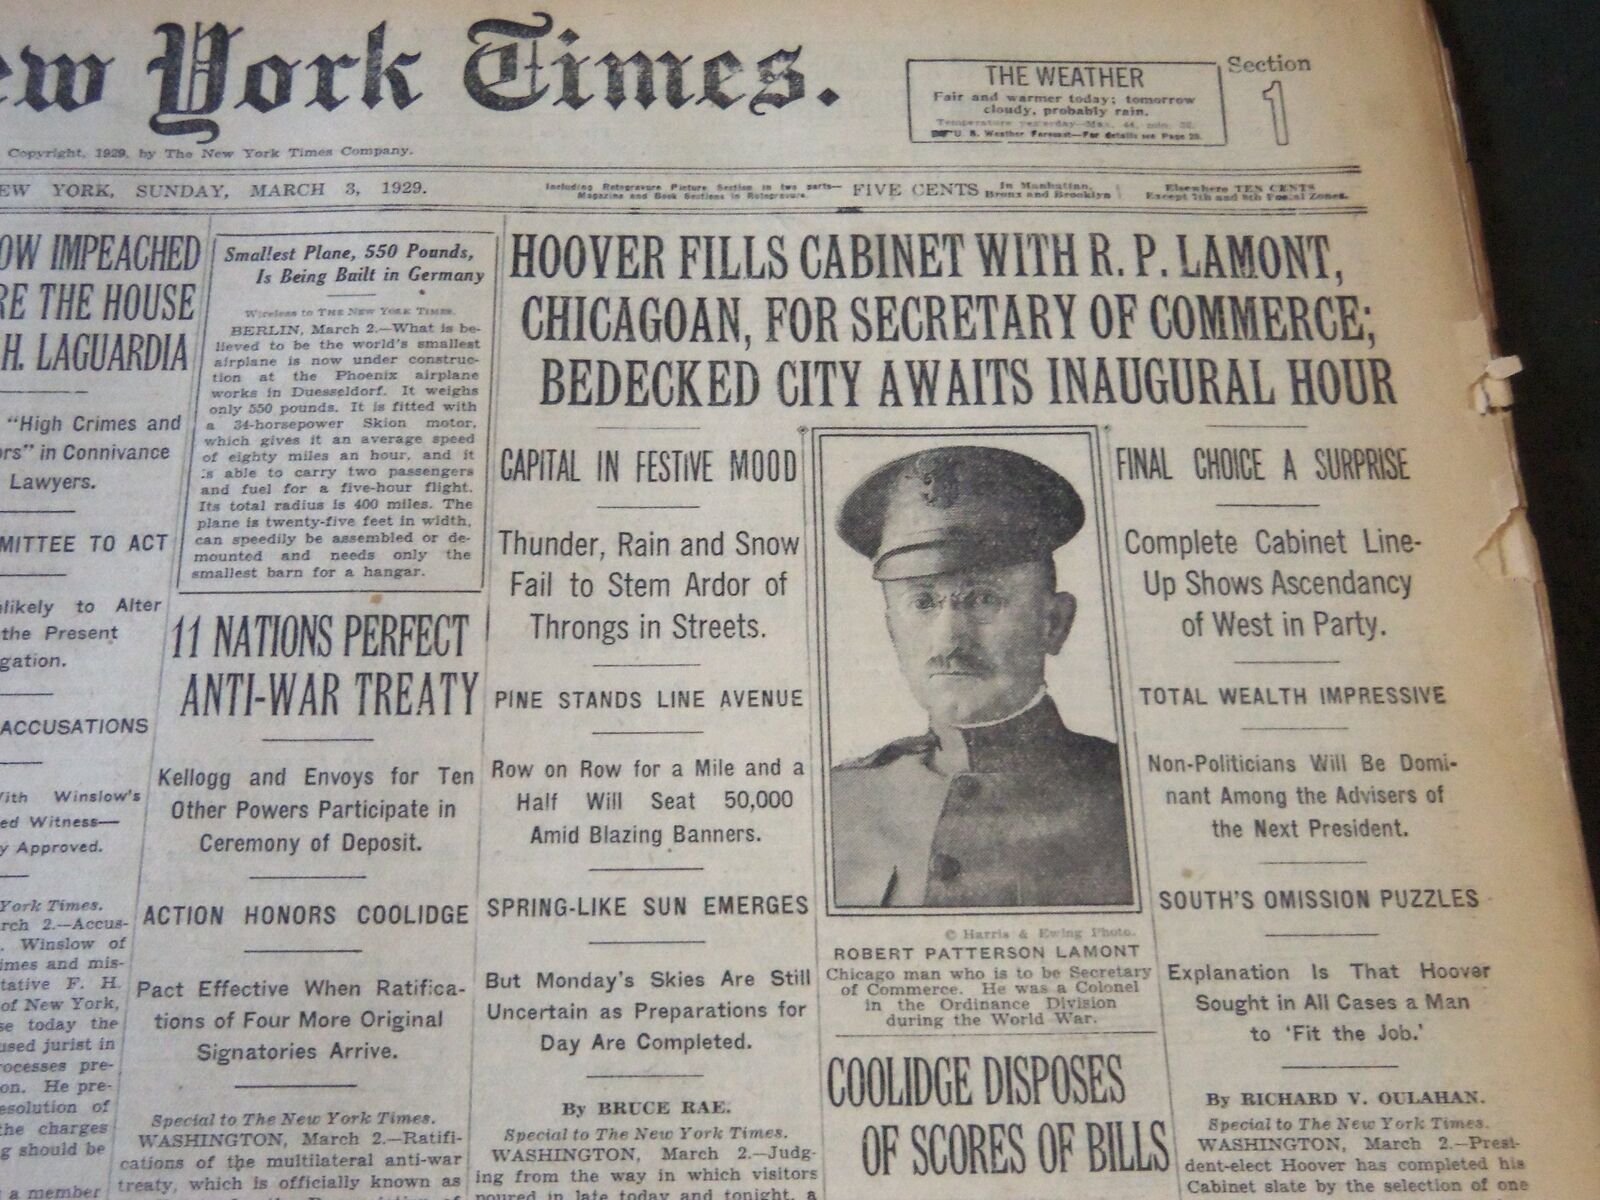 1929 MARCH 3 NEW YORK TIMES - HOOVER FILLS CABINET WITH R. P. LAMONT - NT 6615